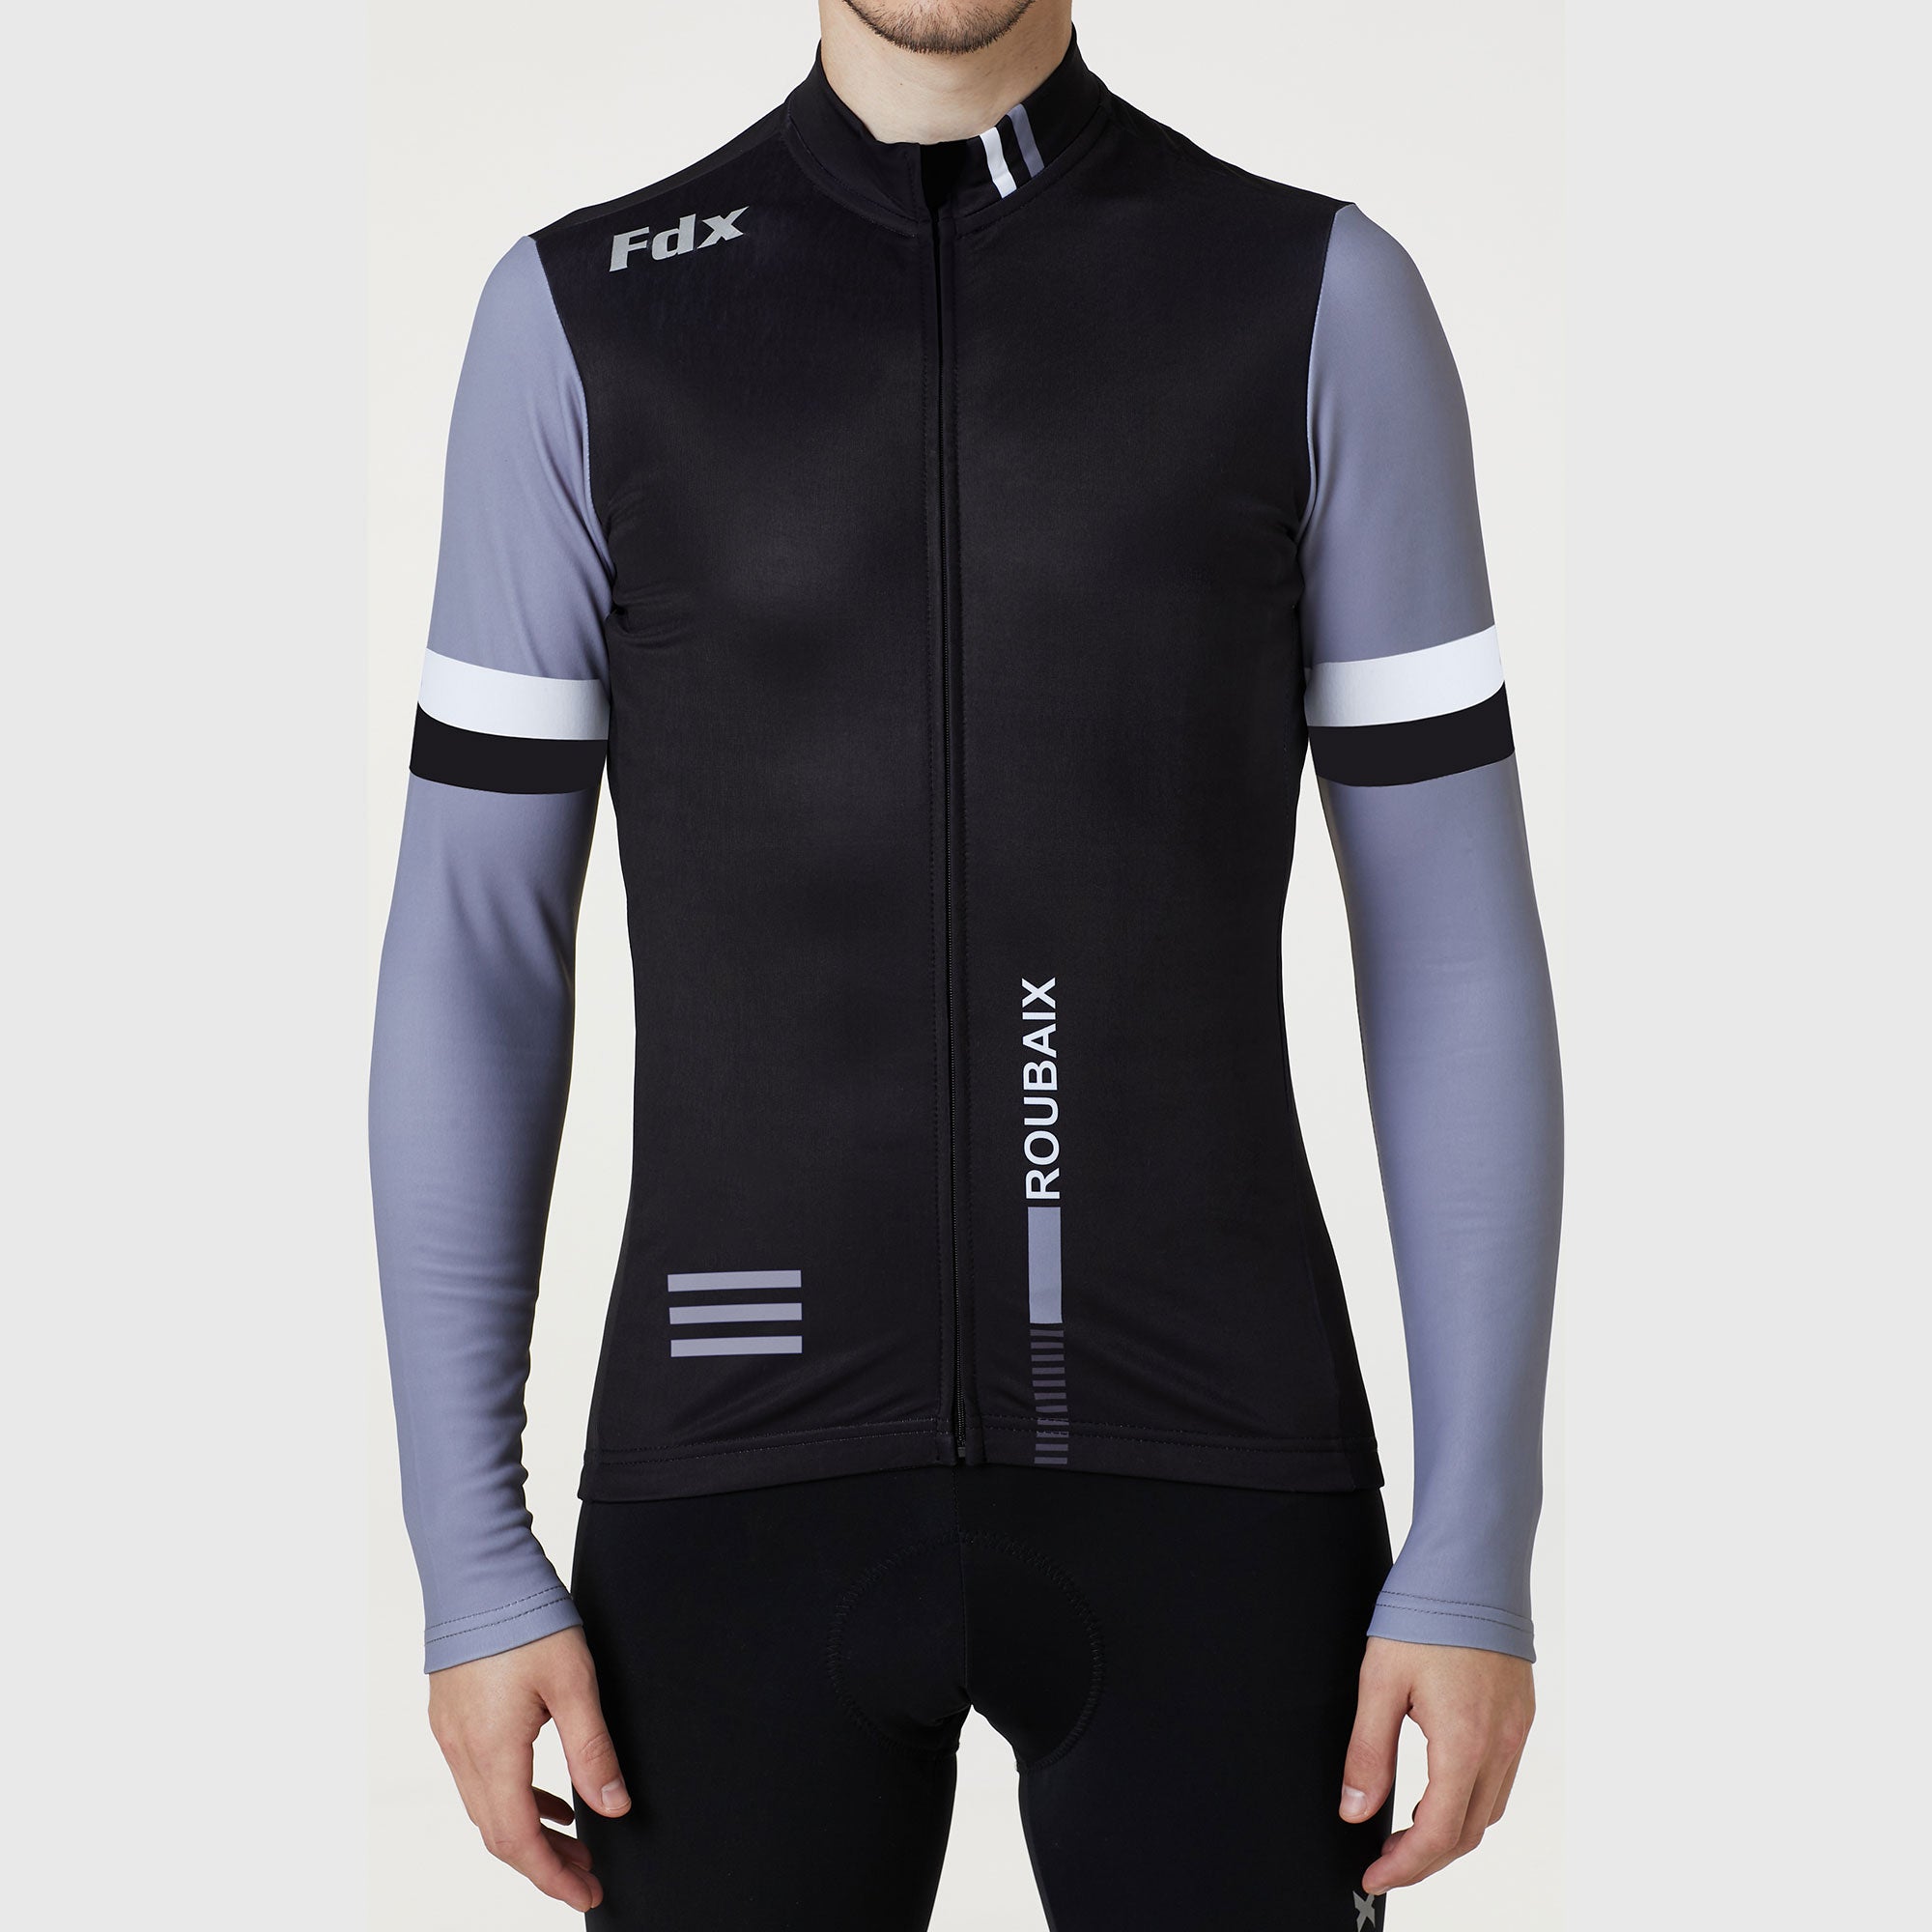 Fdx Limited Edition Men's Black Thermal Roubaix Long Sleeve Cycling Jersey